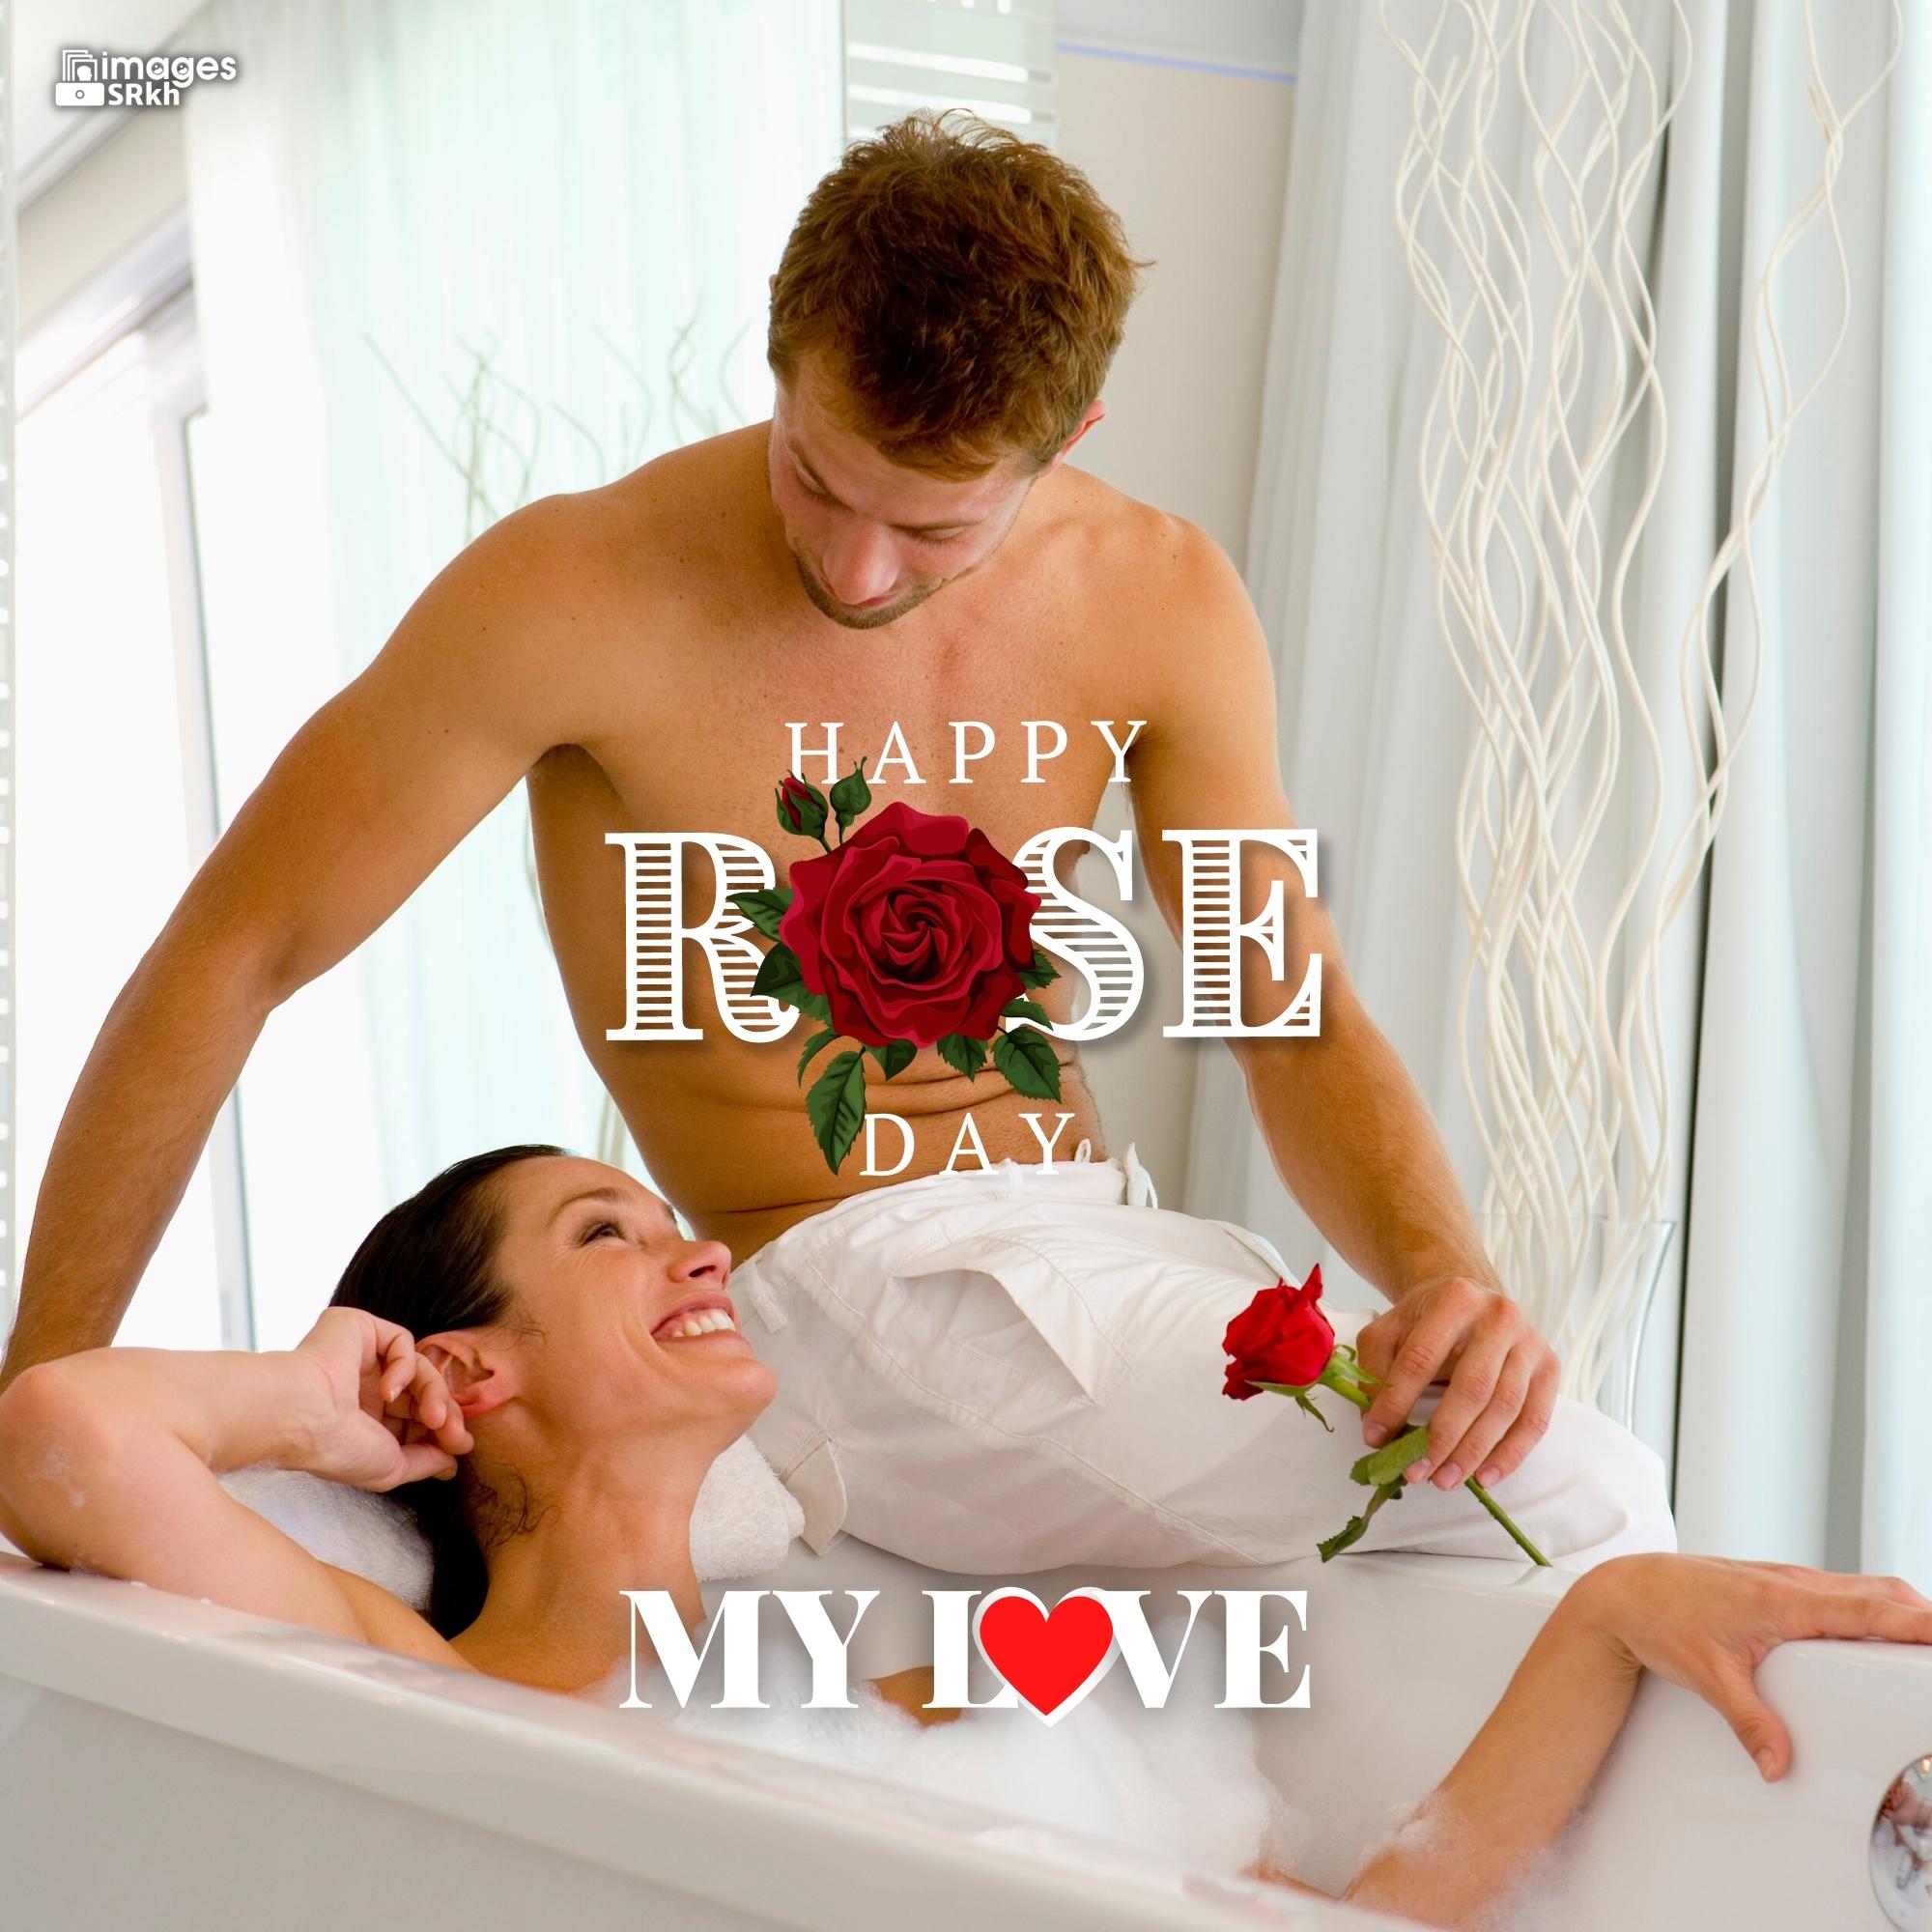 Happy Rose Day My Love (44) | HD IMAGES